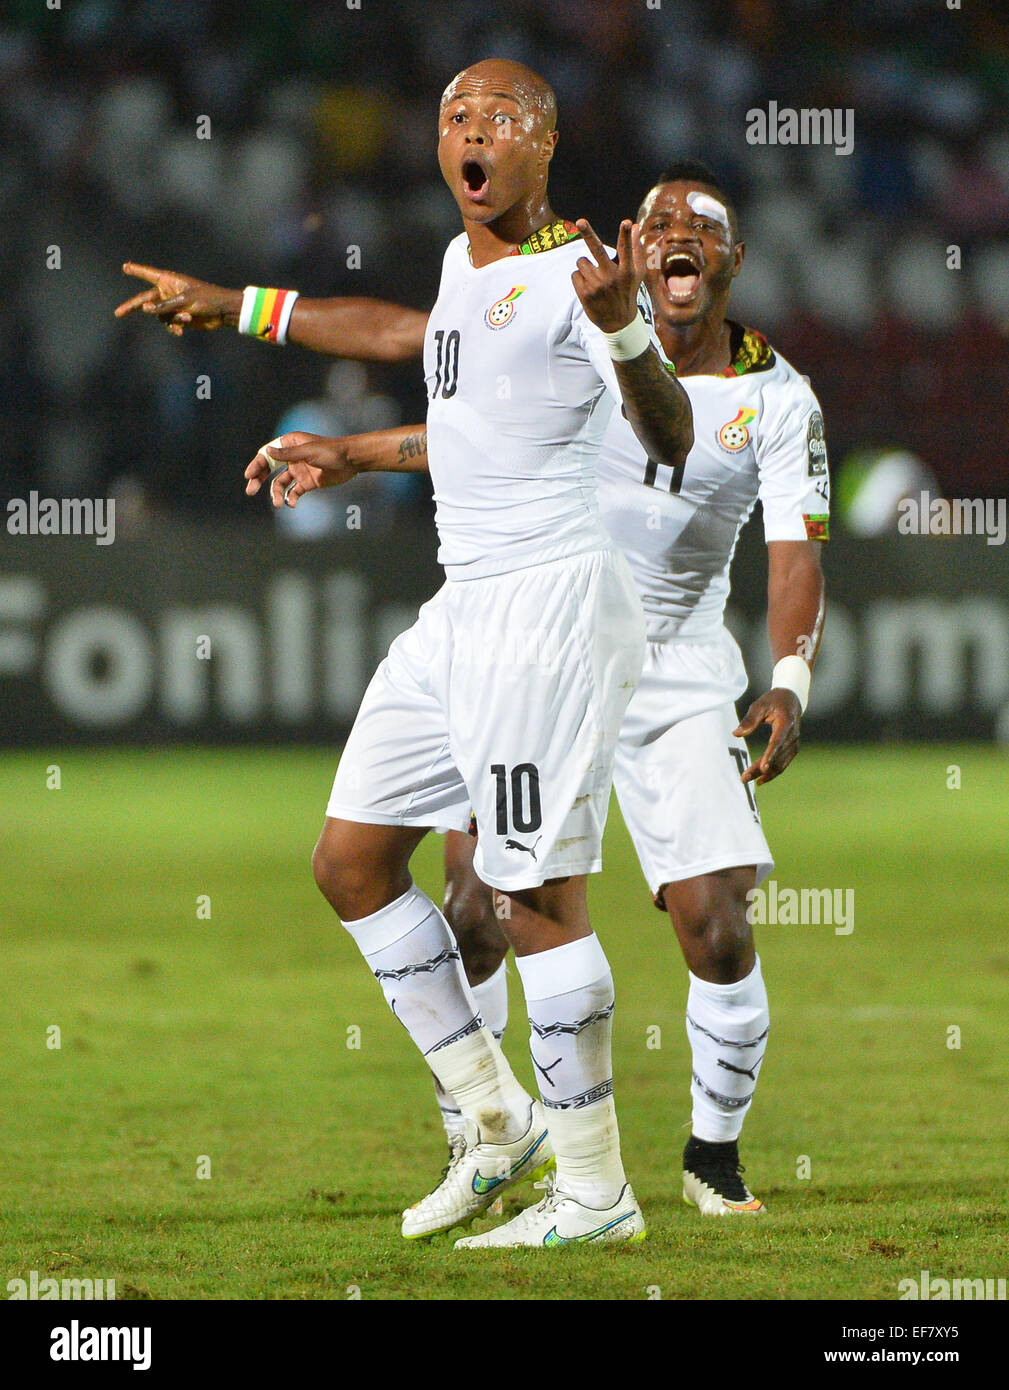 Equitorial Guinea. 27th Jan, 2015. African Cup of Nations football tournament, South Africa versus Ghana. Andre Ayew challenges Mubarak Wakaso ( Ghana ) Joie © Action Plus Sports/Alamy Live News Stock Photo